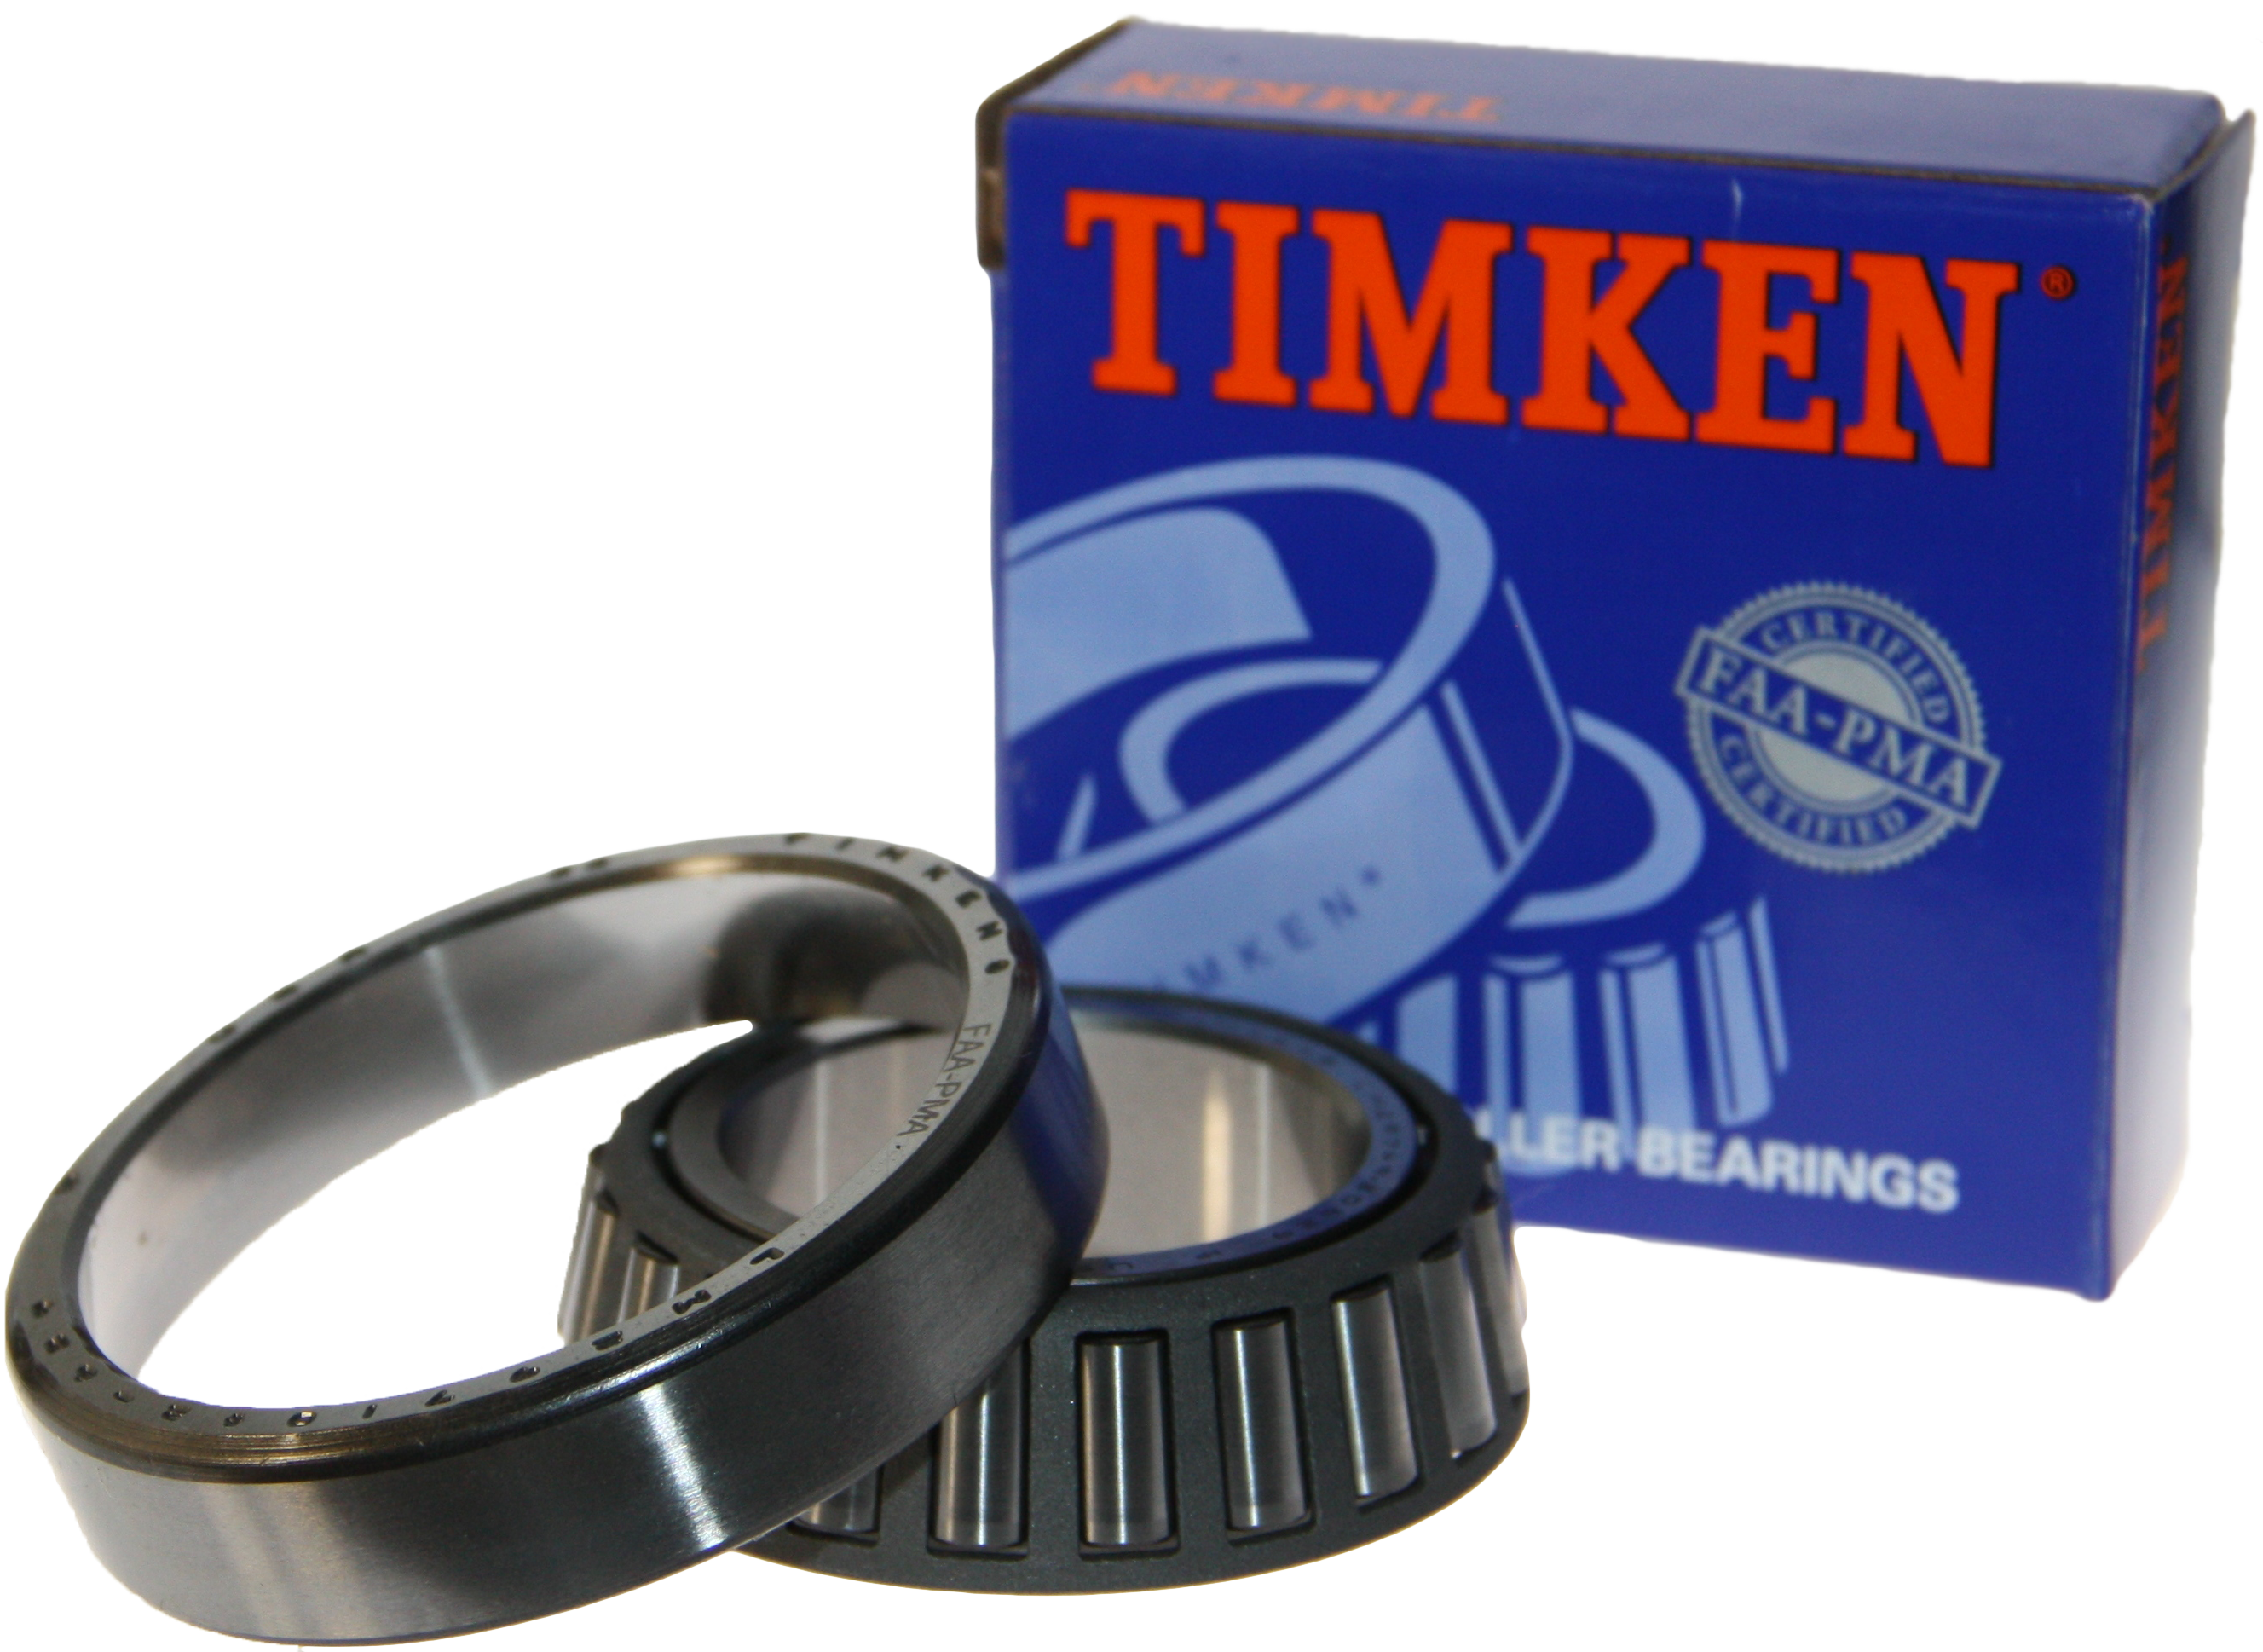 Timken Bearing Cup and Cone